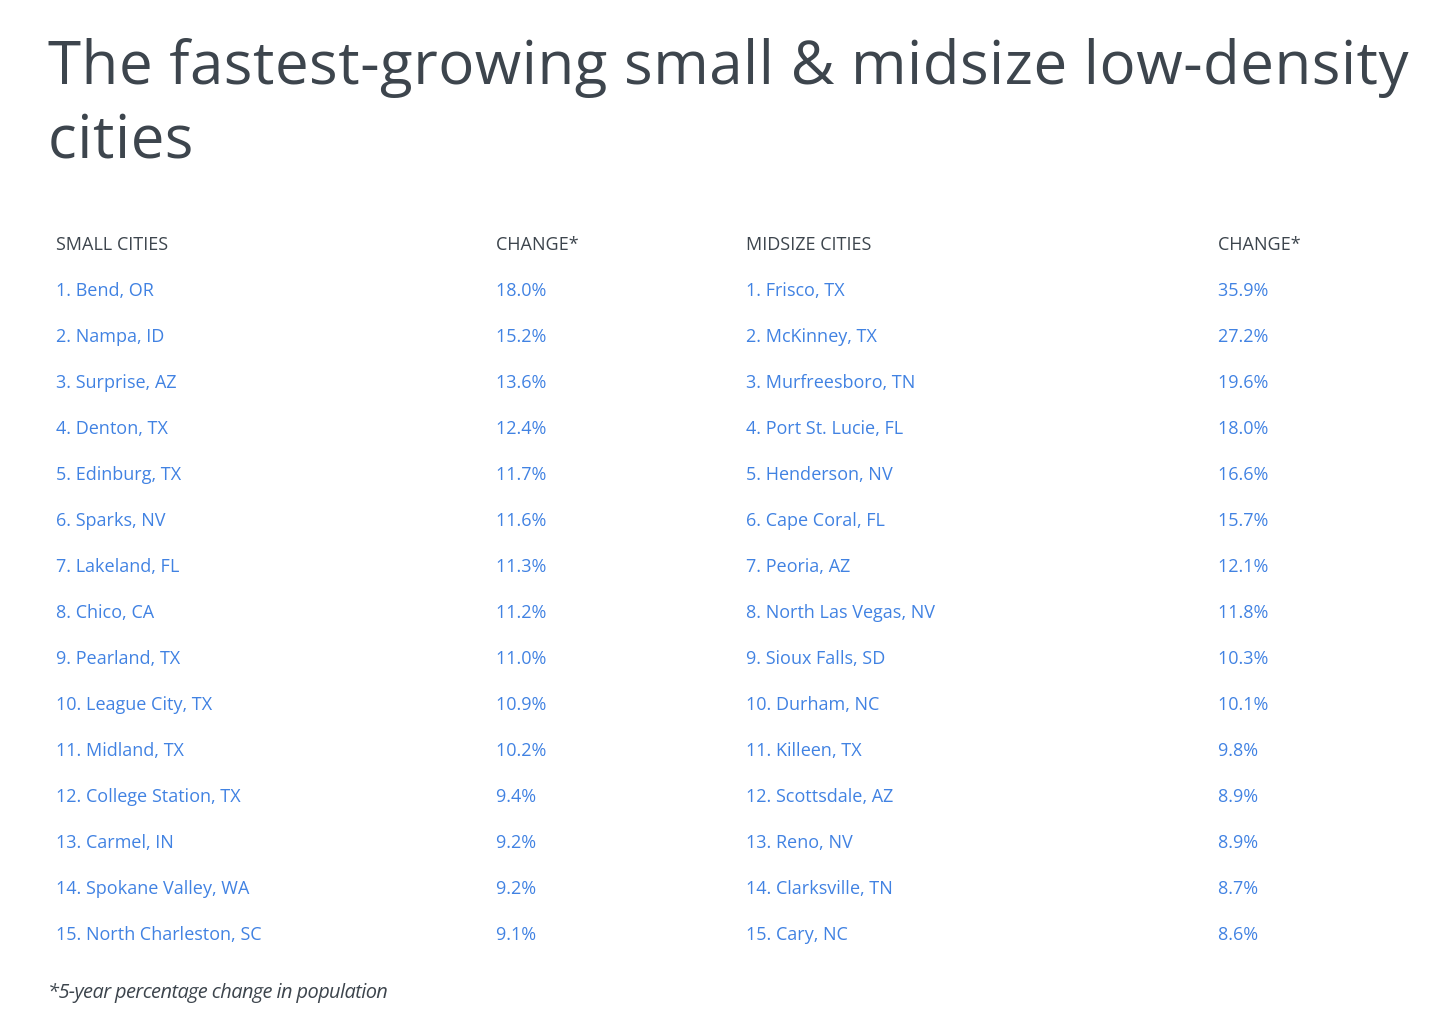 The fastest-growing small & midsize low-density cities